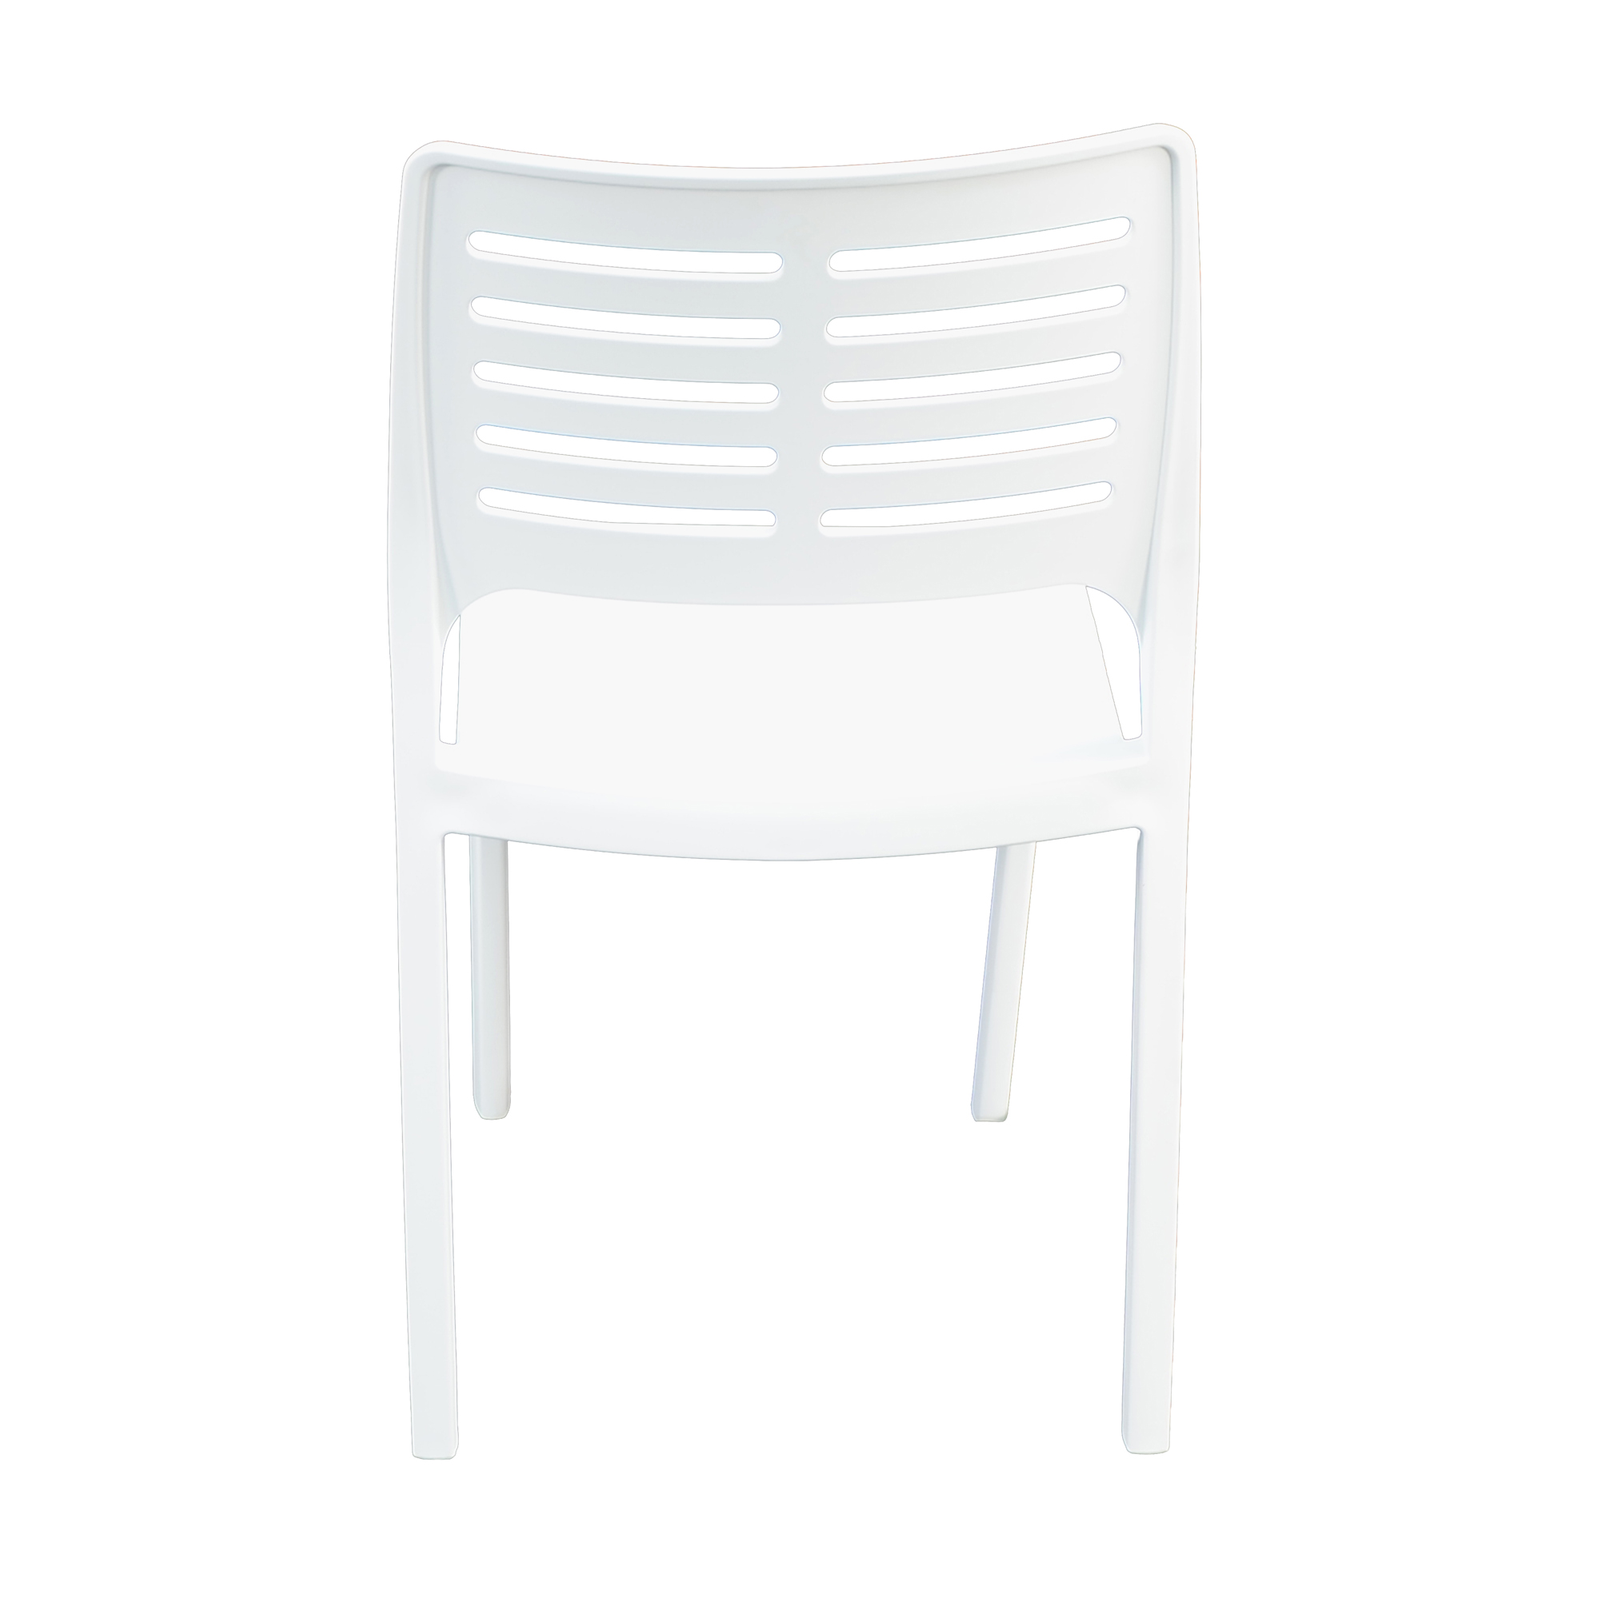 Trabella Mistral Chair in White (Pack of 2) Chairs Trabella Default Title  